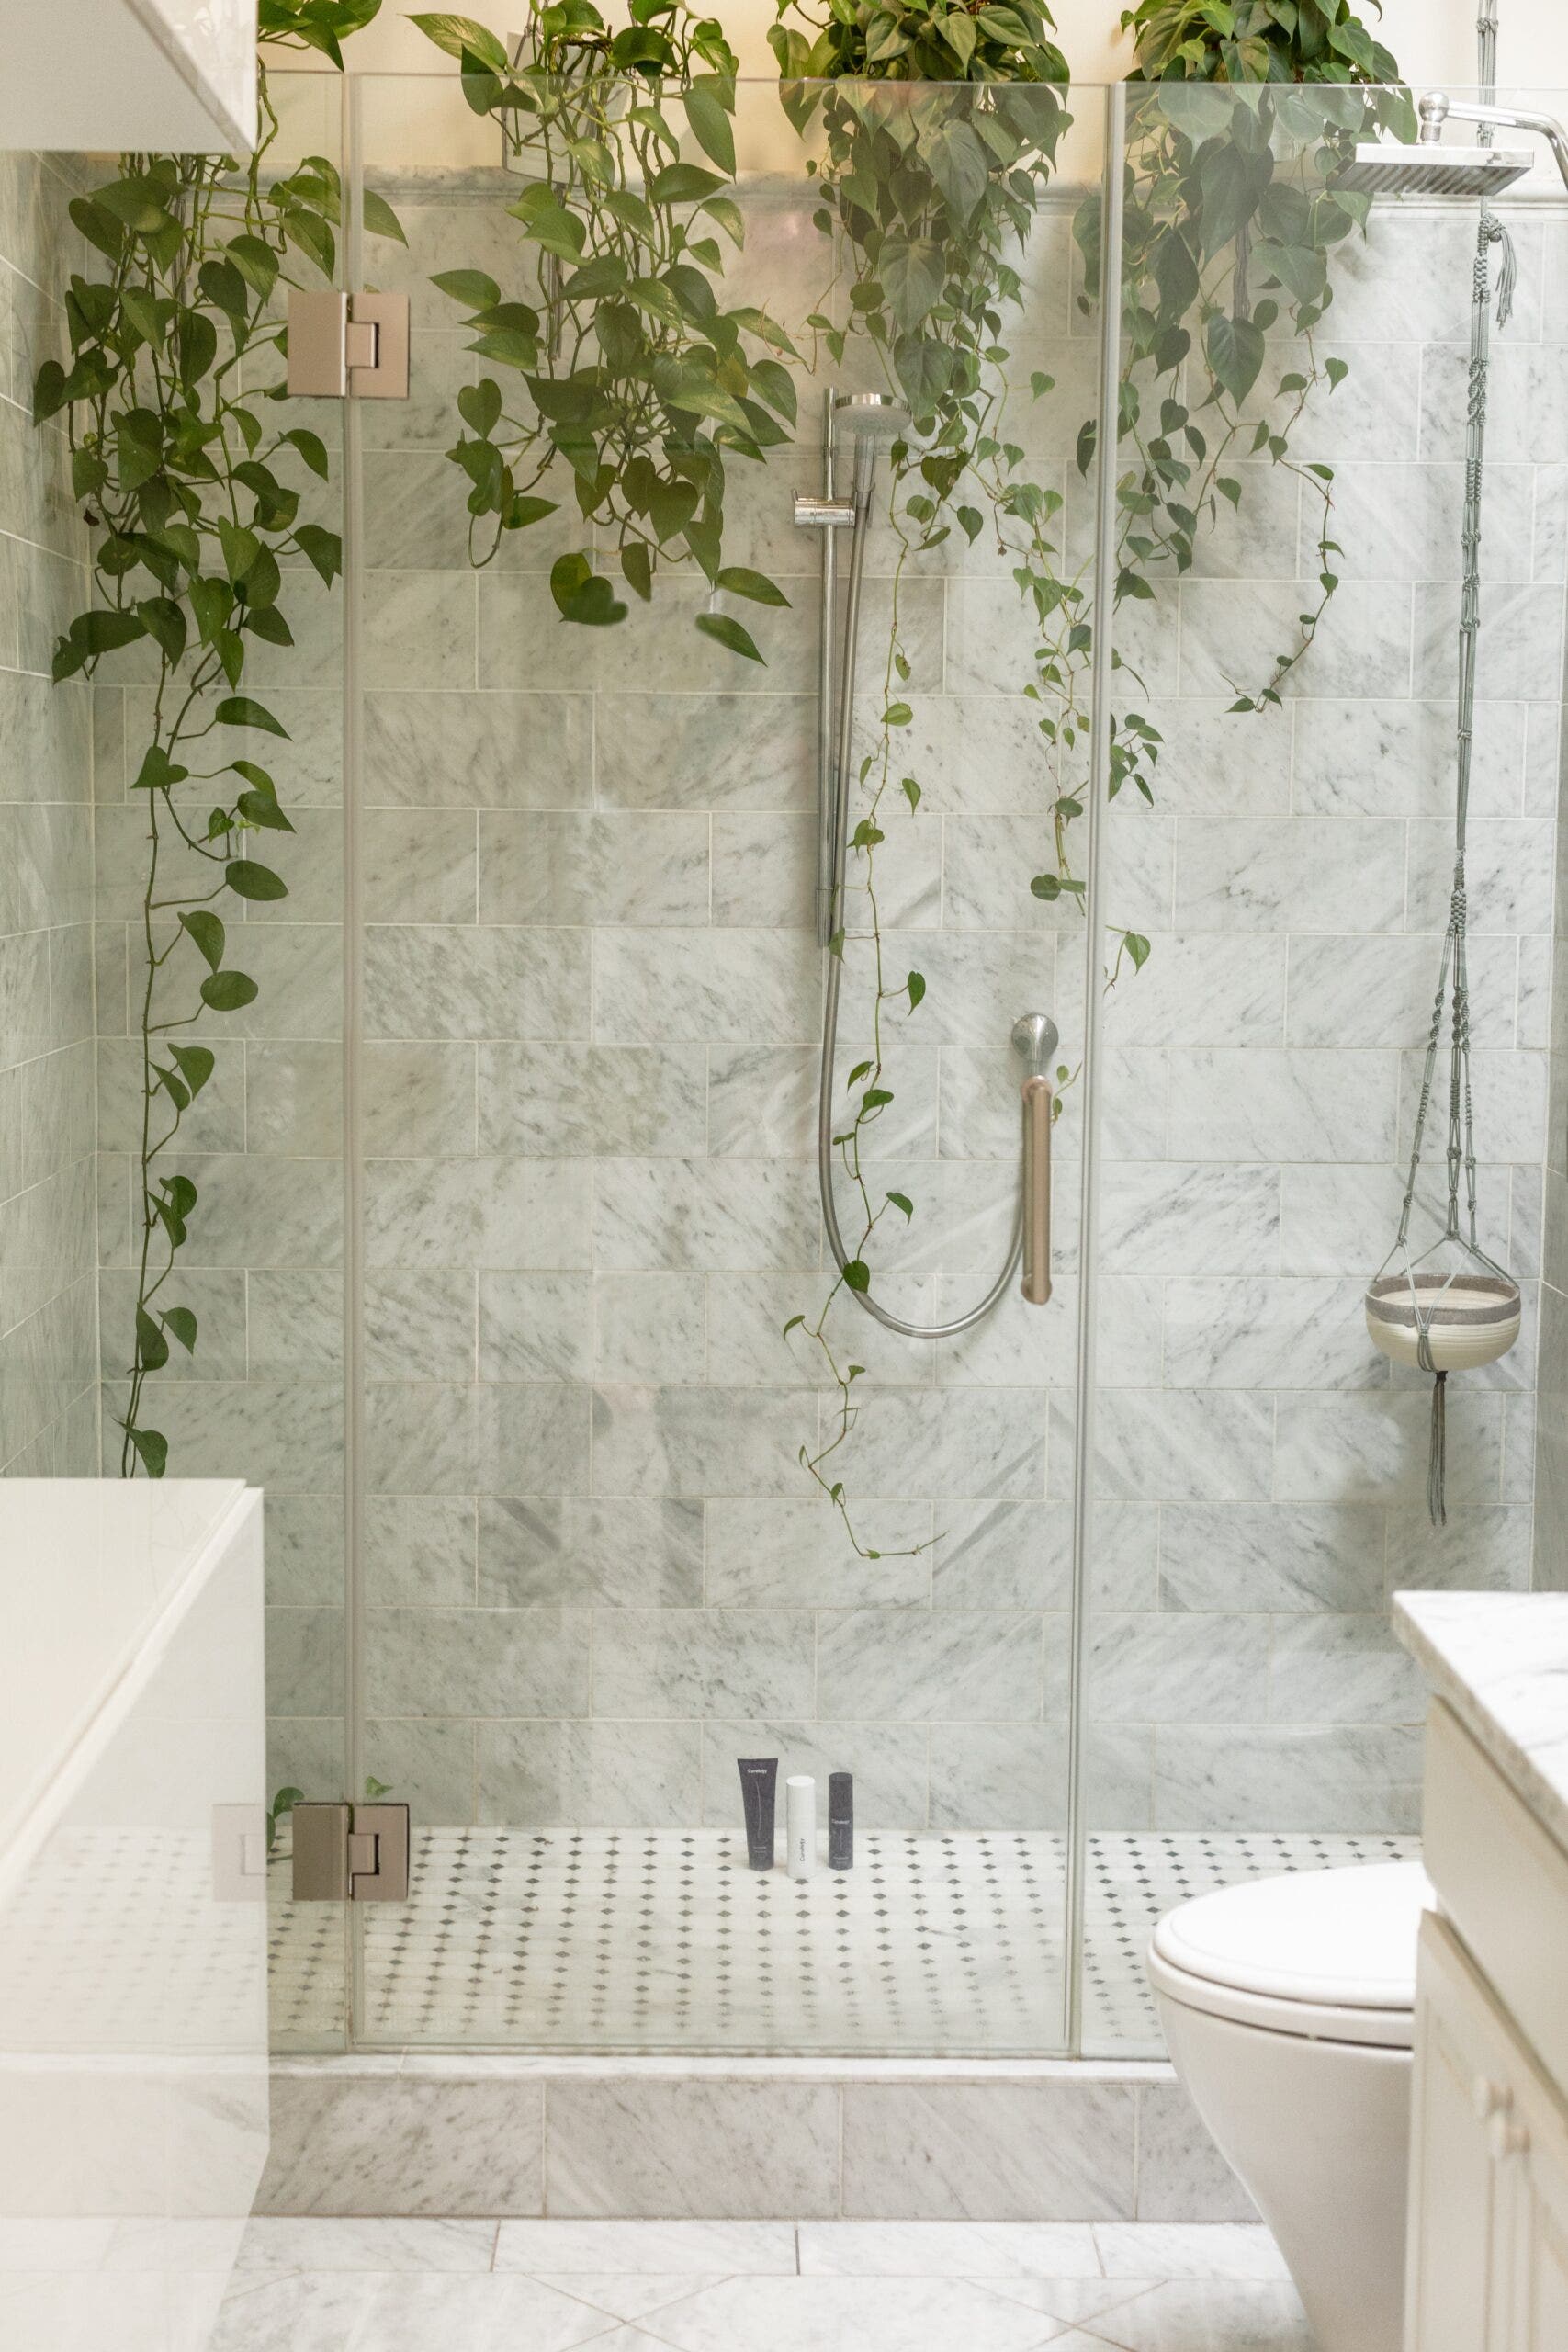 Shower with Greenery